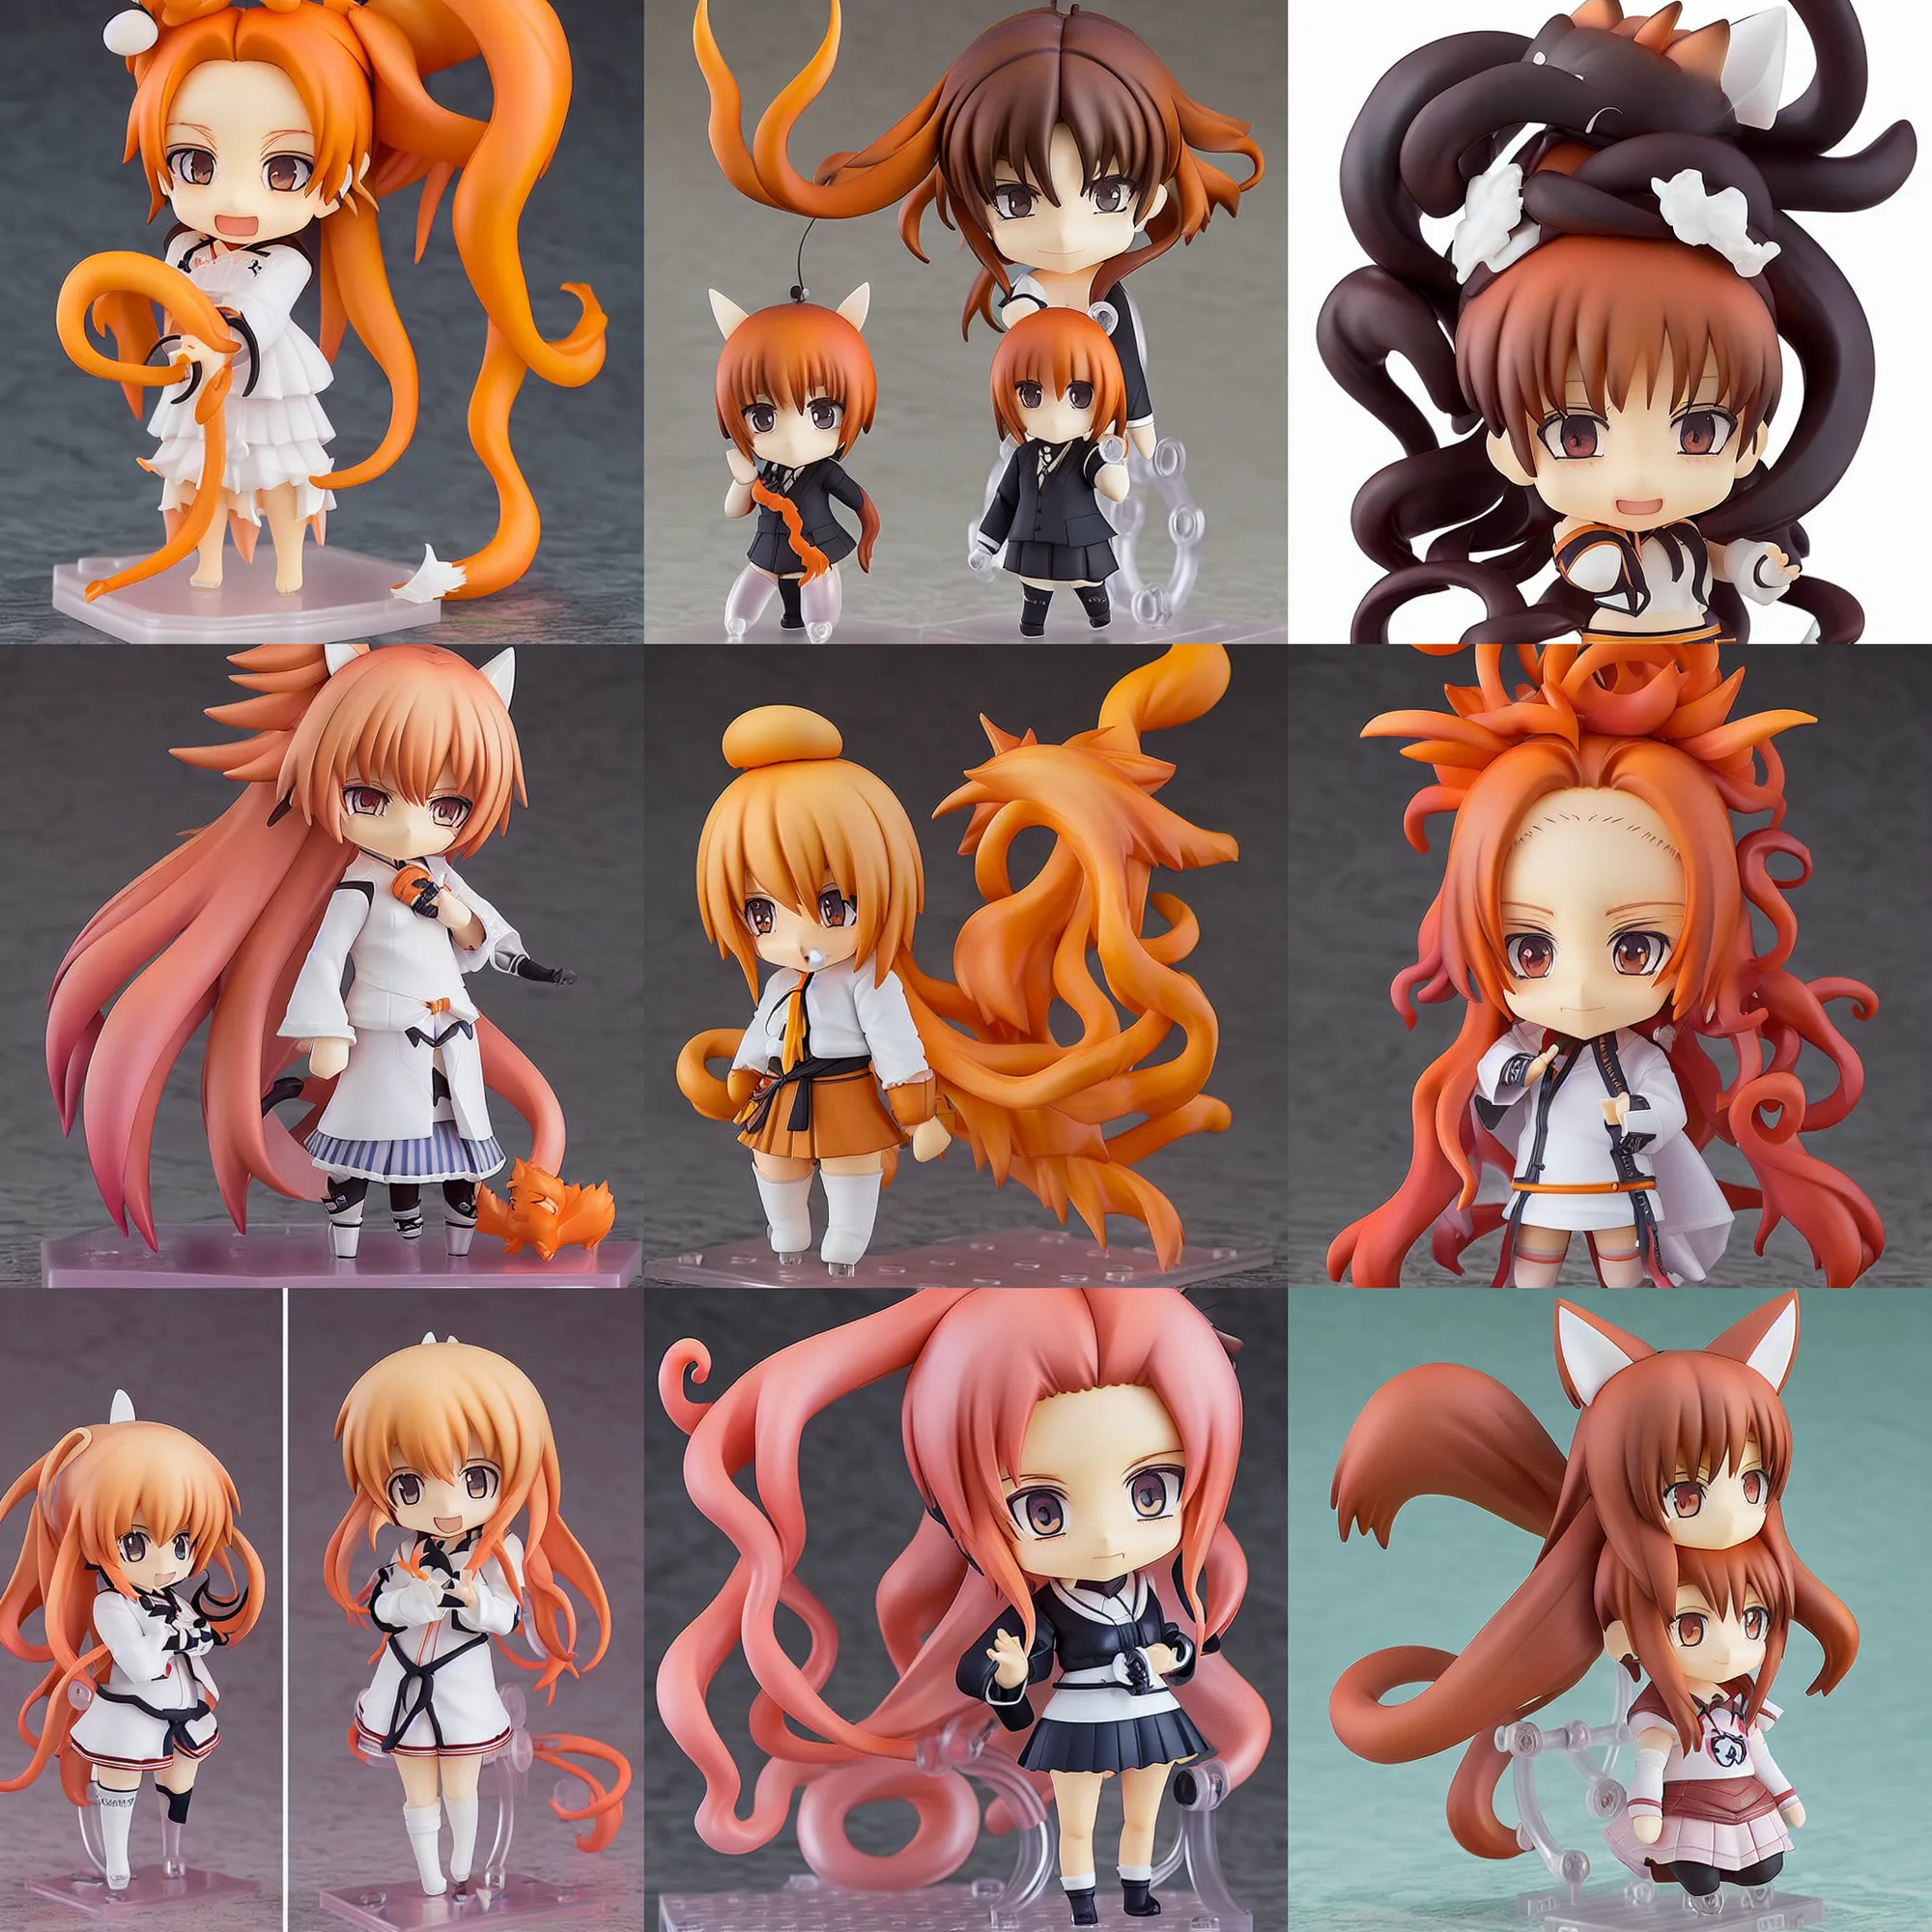 Prompt: An anime Nendoroid of Kitsune with tentacles for hair, figurine, detailed product photo